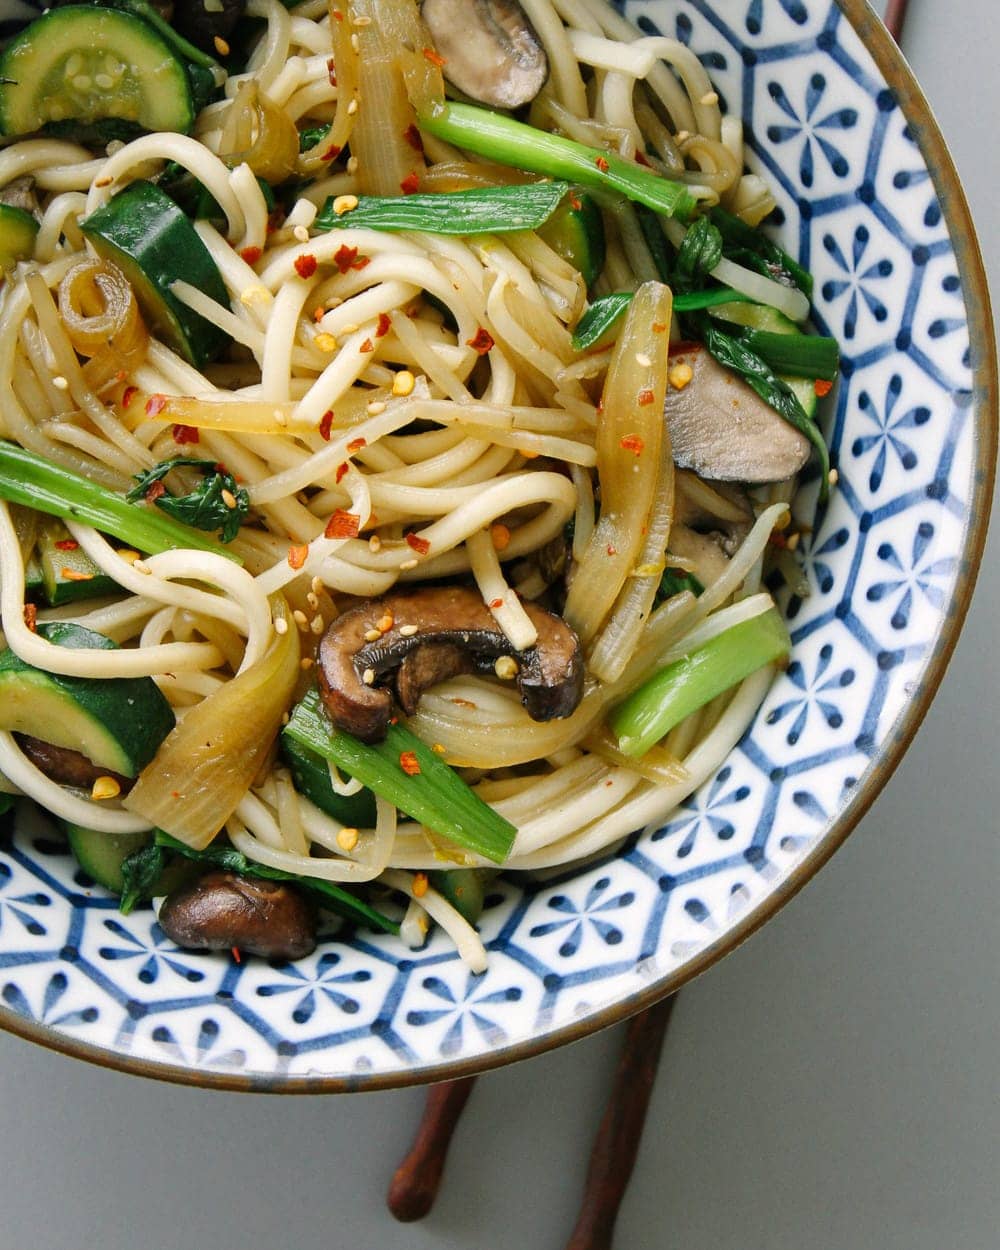 udon noodles with mushrooms and onions in a blue and white bowl